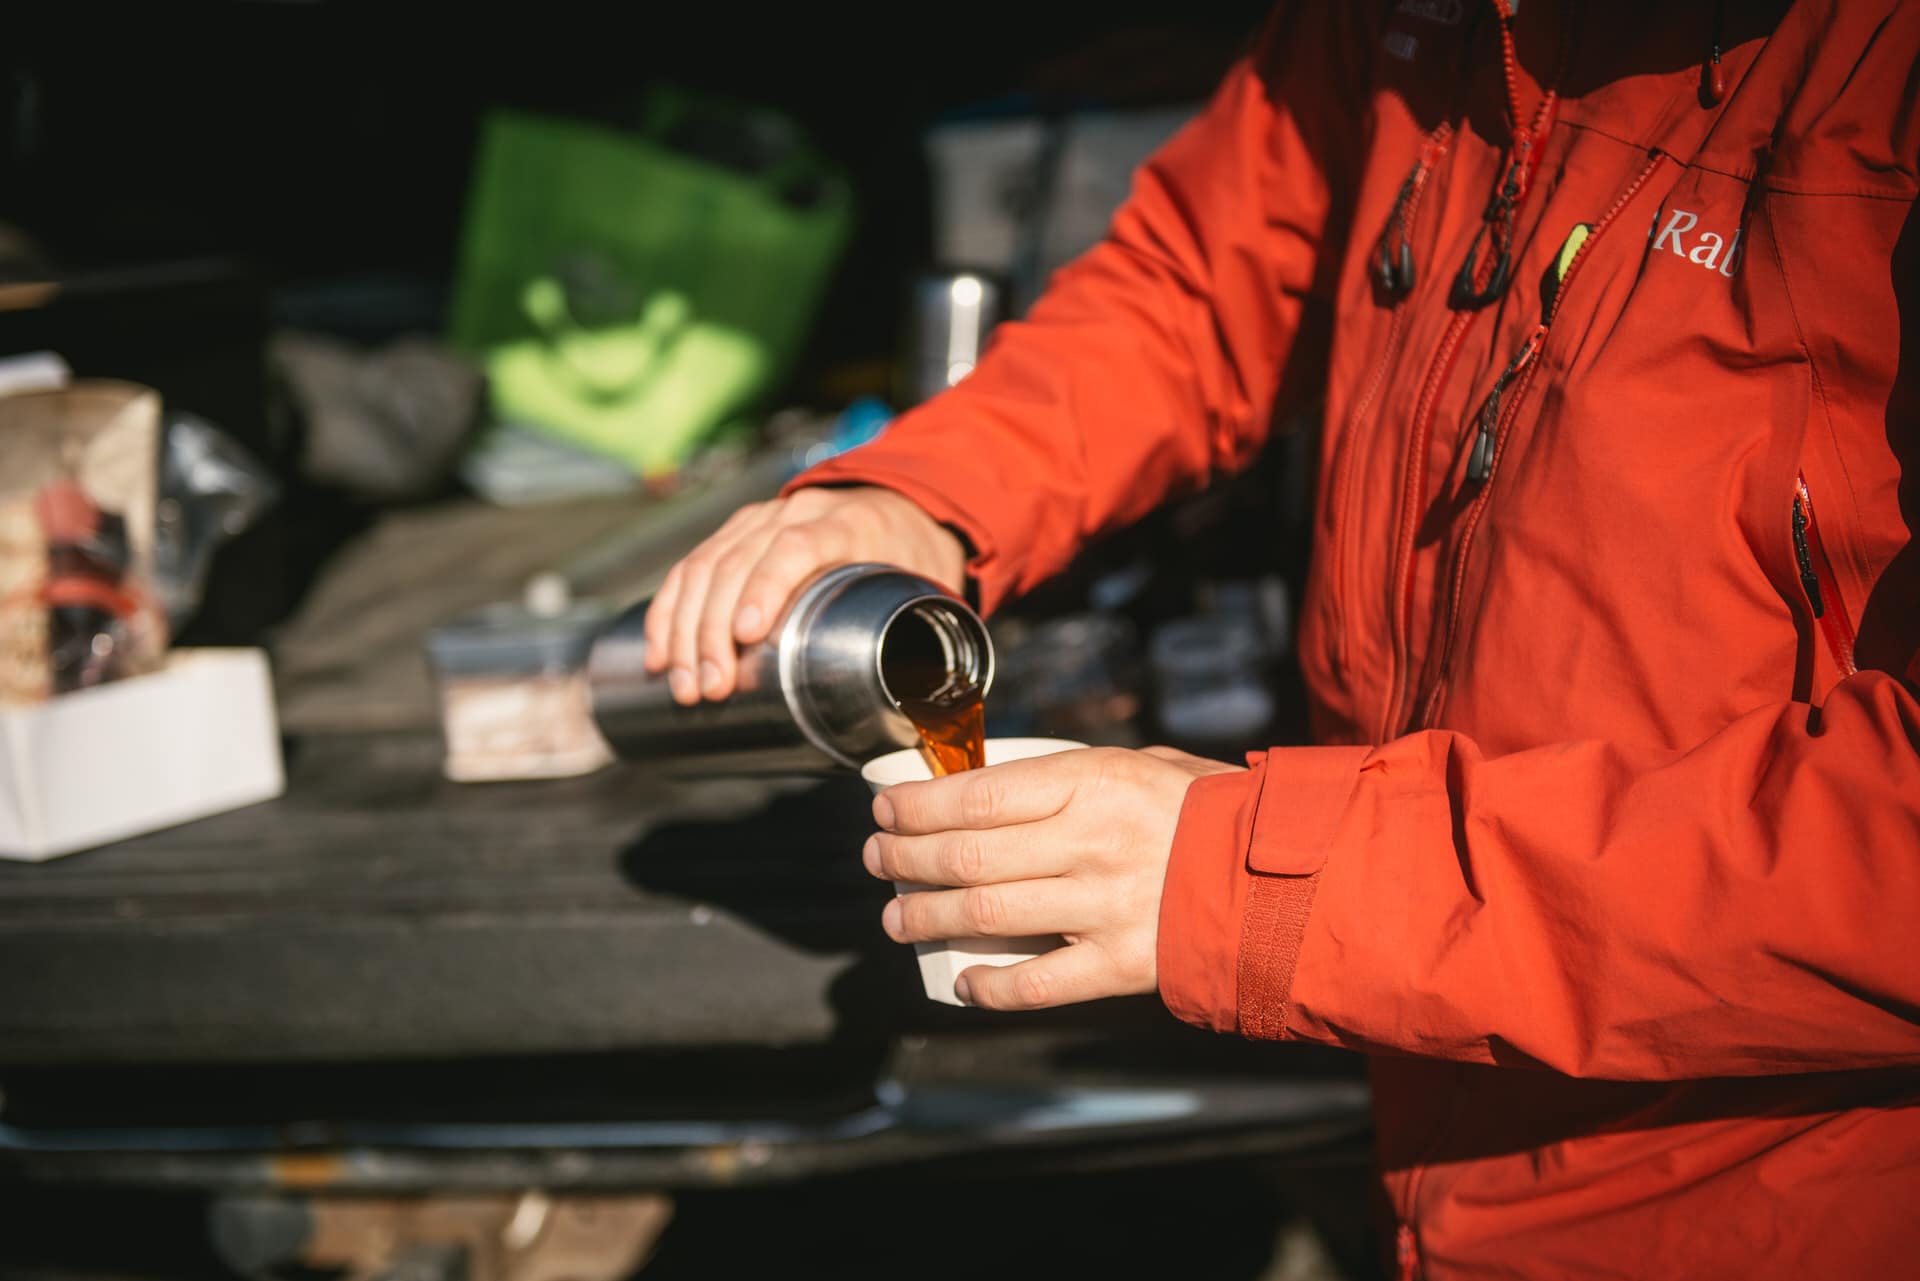 Icelandic guide pouring hot coffee in a mug